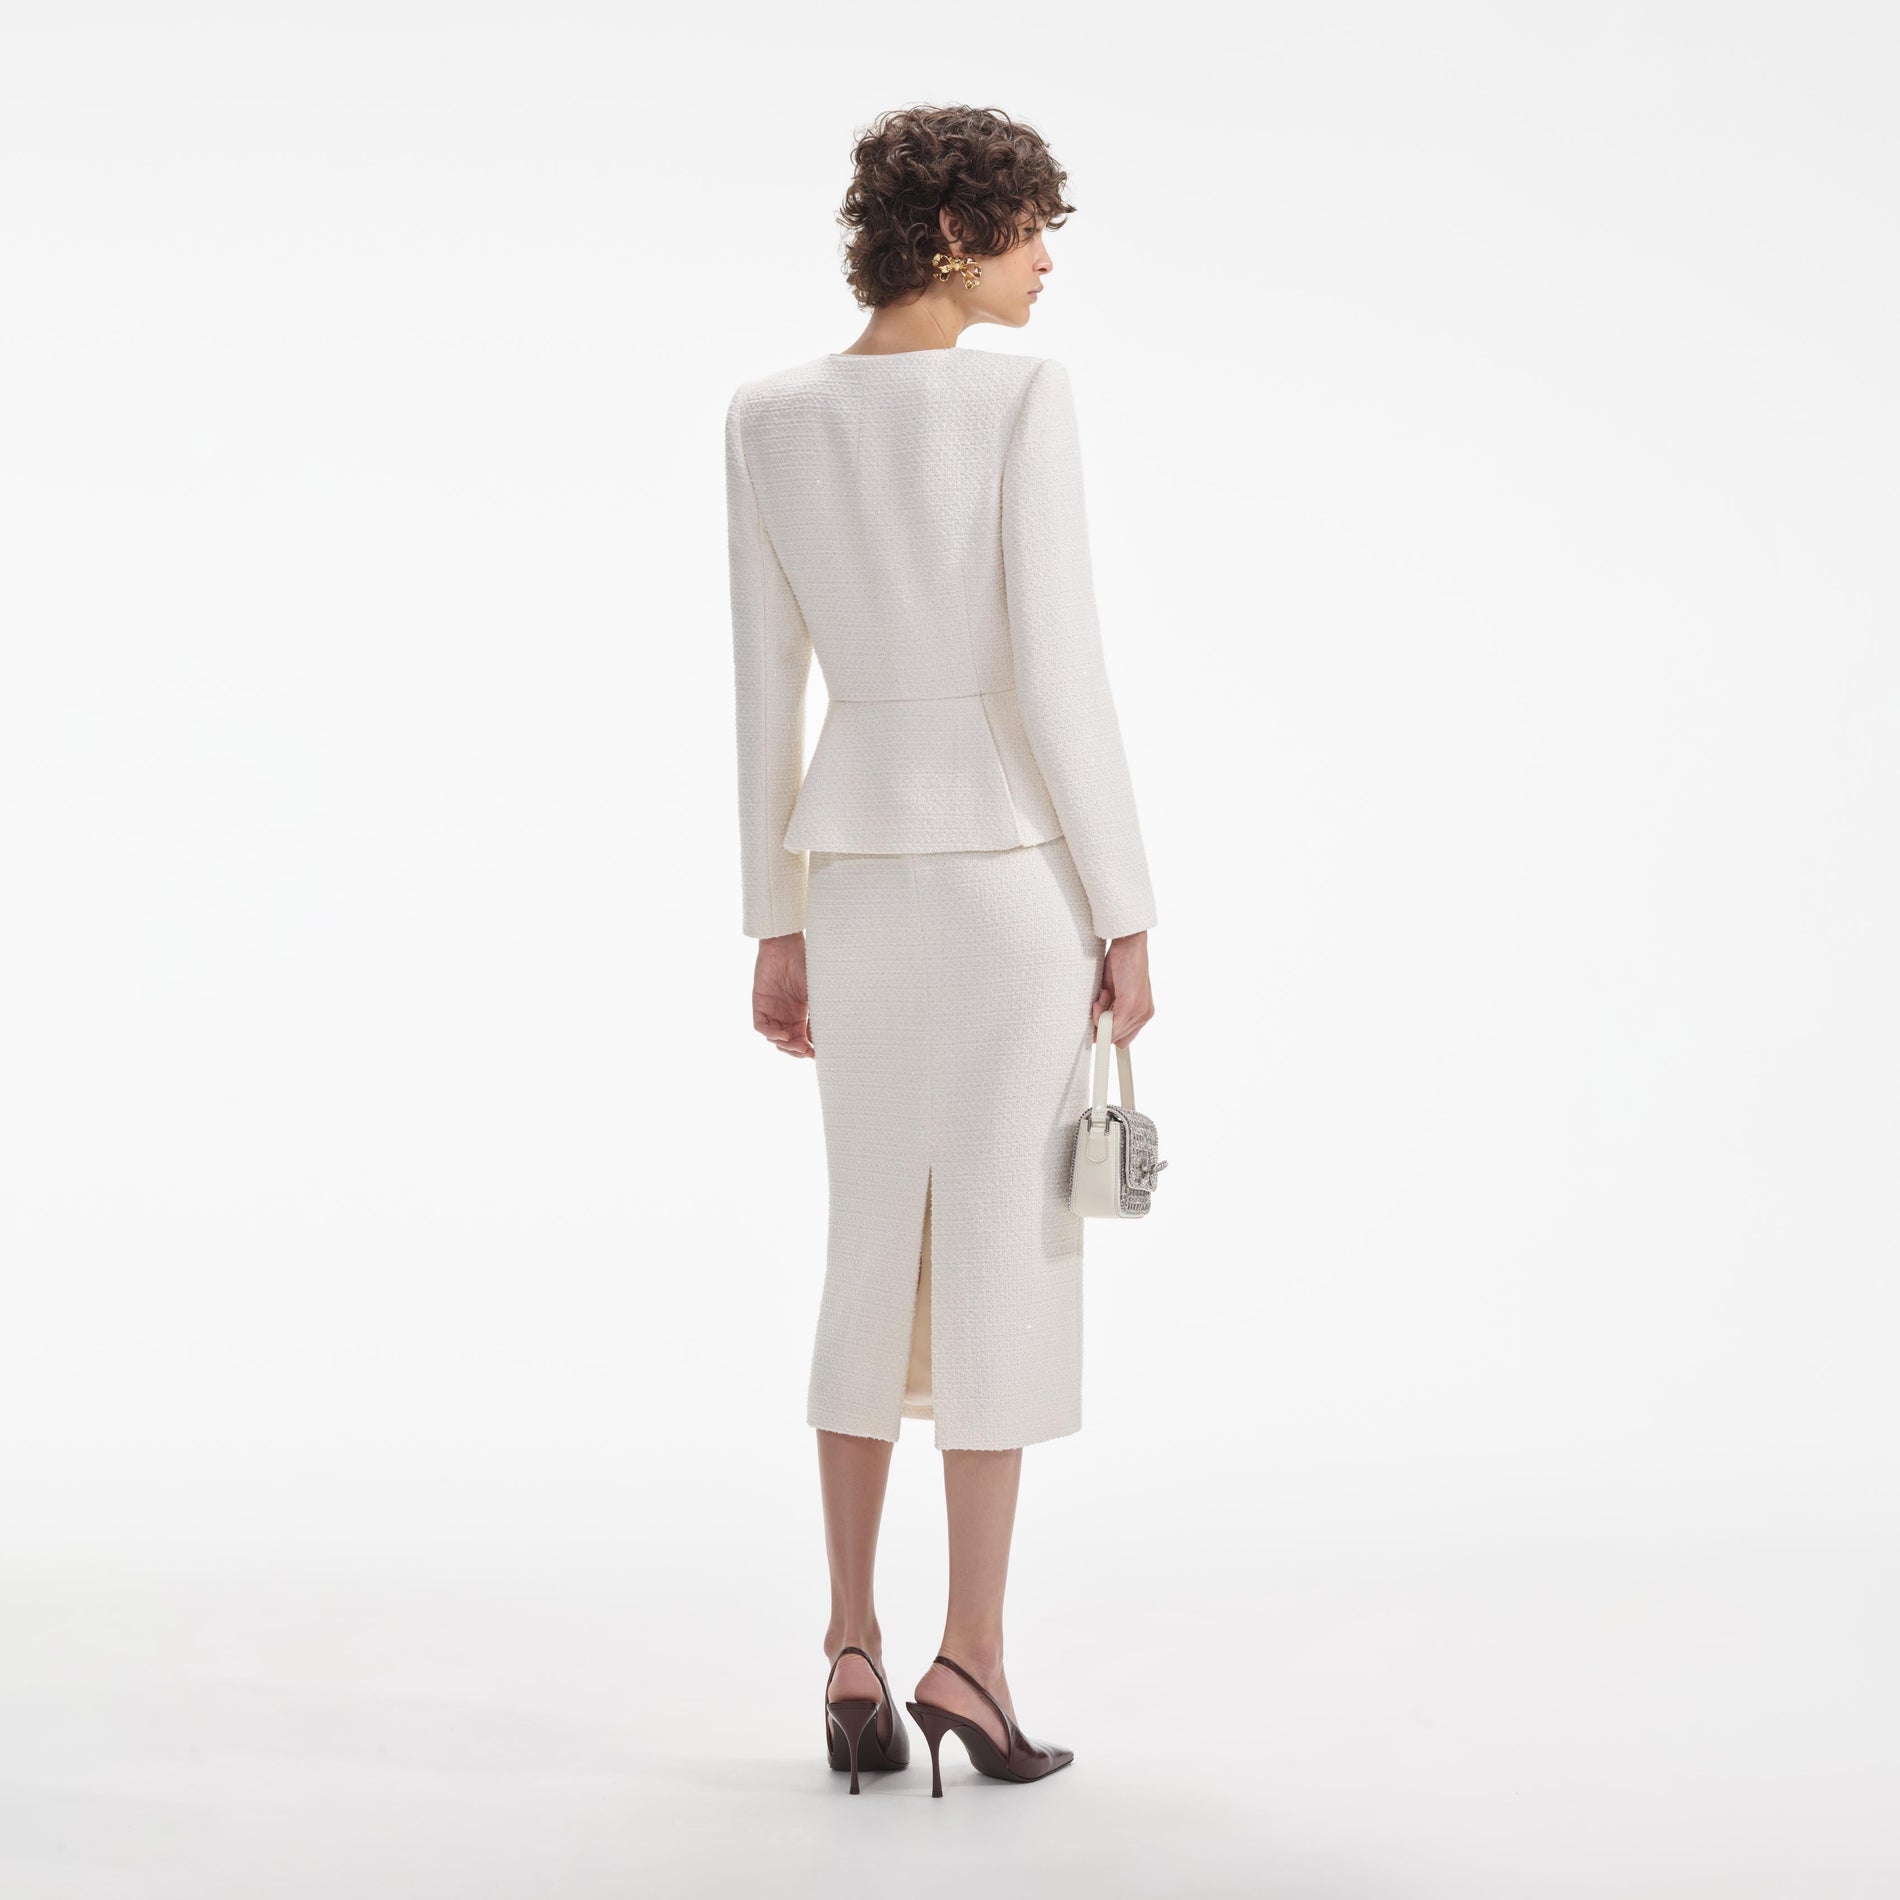 Back view of a woman wearing the White Cream Tinsel Boucle Midi Dress